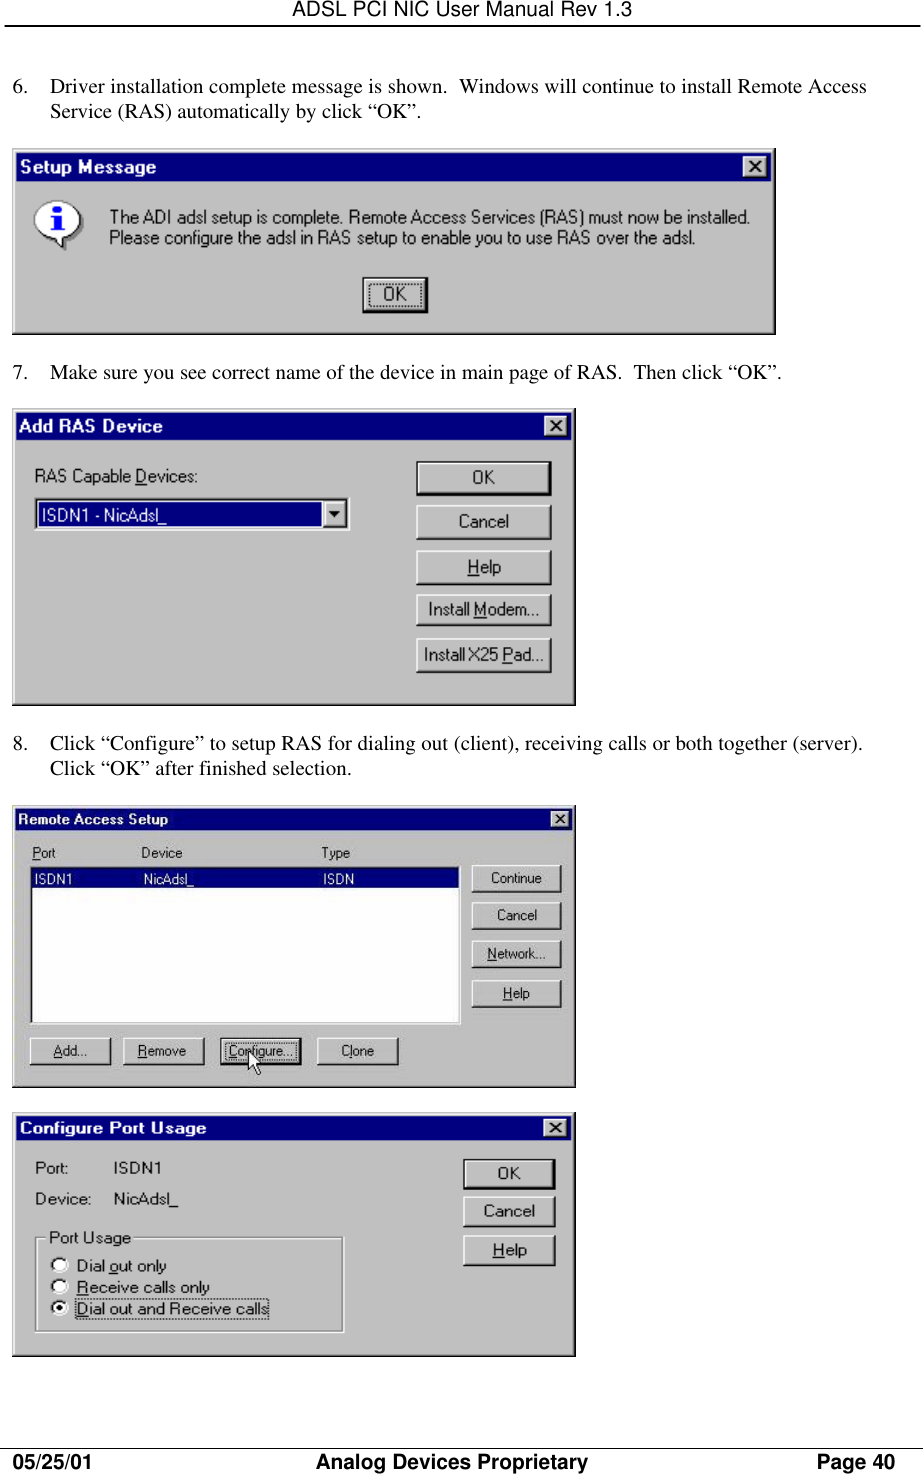 ADSL PCI NIC User Manual Rev 1.305/25/01                                     Analog Devices Proprietary                                      Page 406. Driver installation complete message is shown.  Windows will continue to install Remote AccessService (RAS) automatically by click “OK”.7. Make sure you see correct name of the device in main page of RAS.  Then click “OK”.8. Click “Configure” to setup RAS for dialing out (client), receiving calls or both together (server).Click “OK” after finished selection.